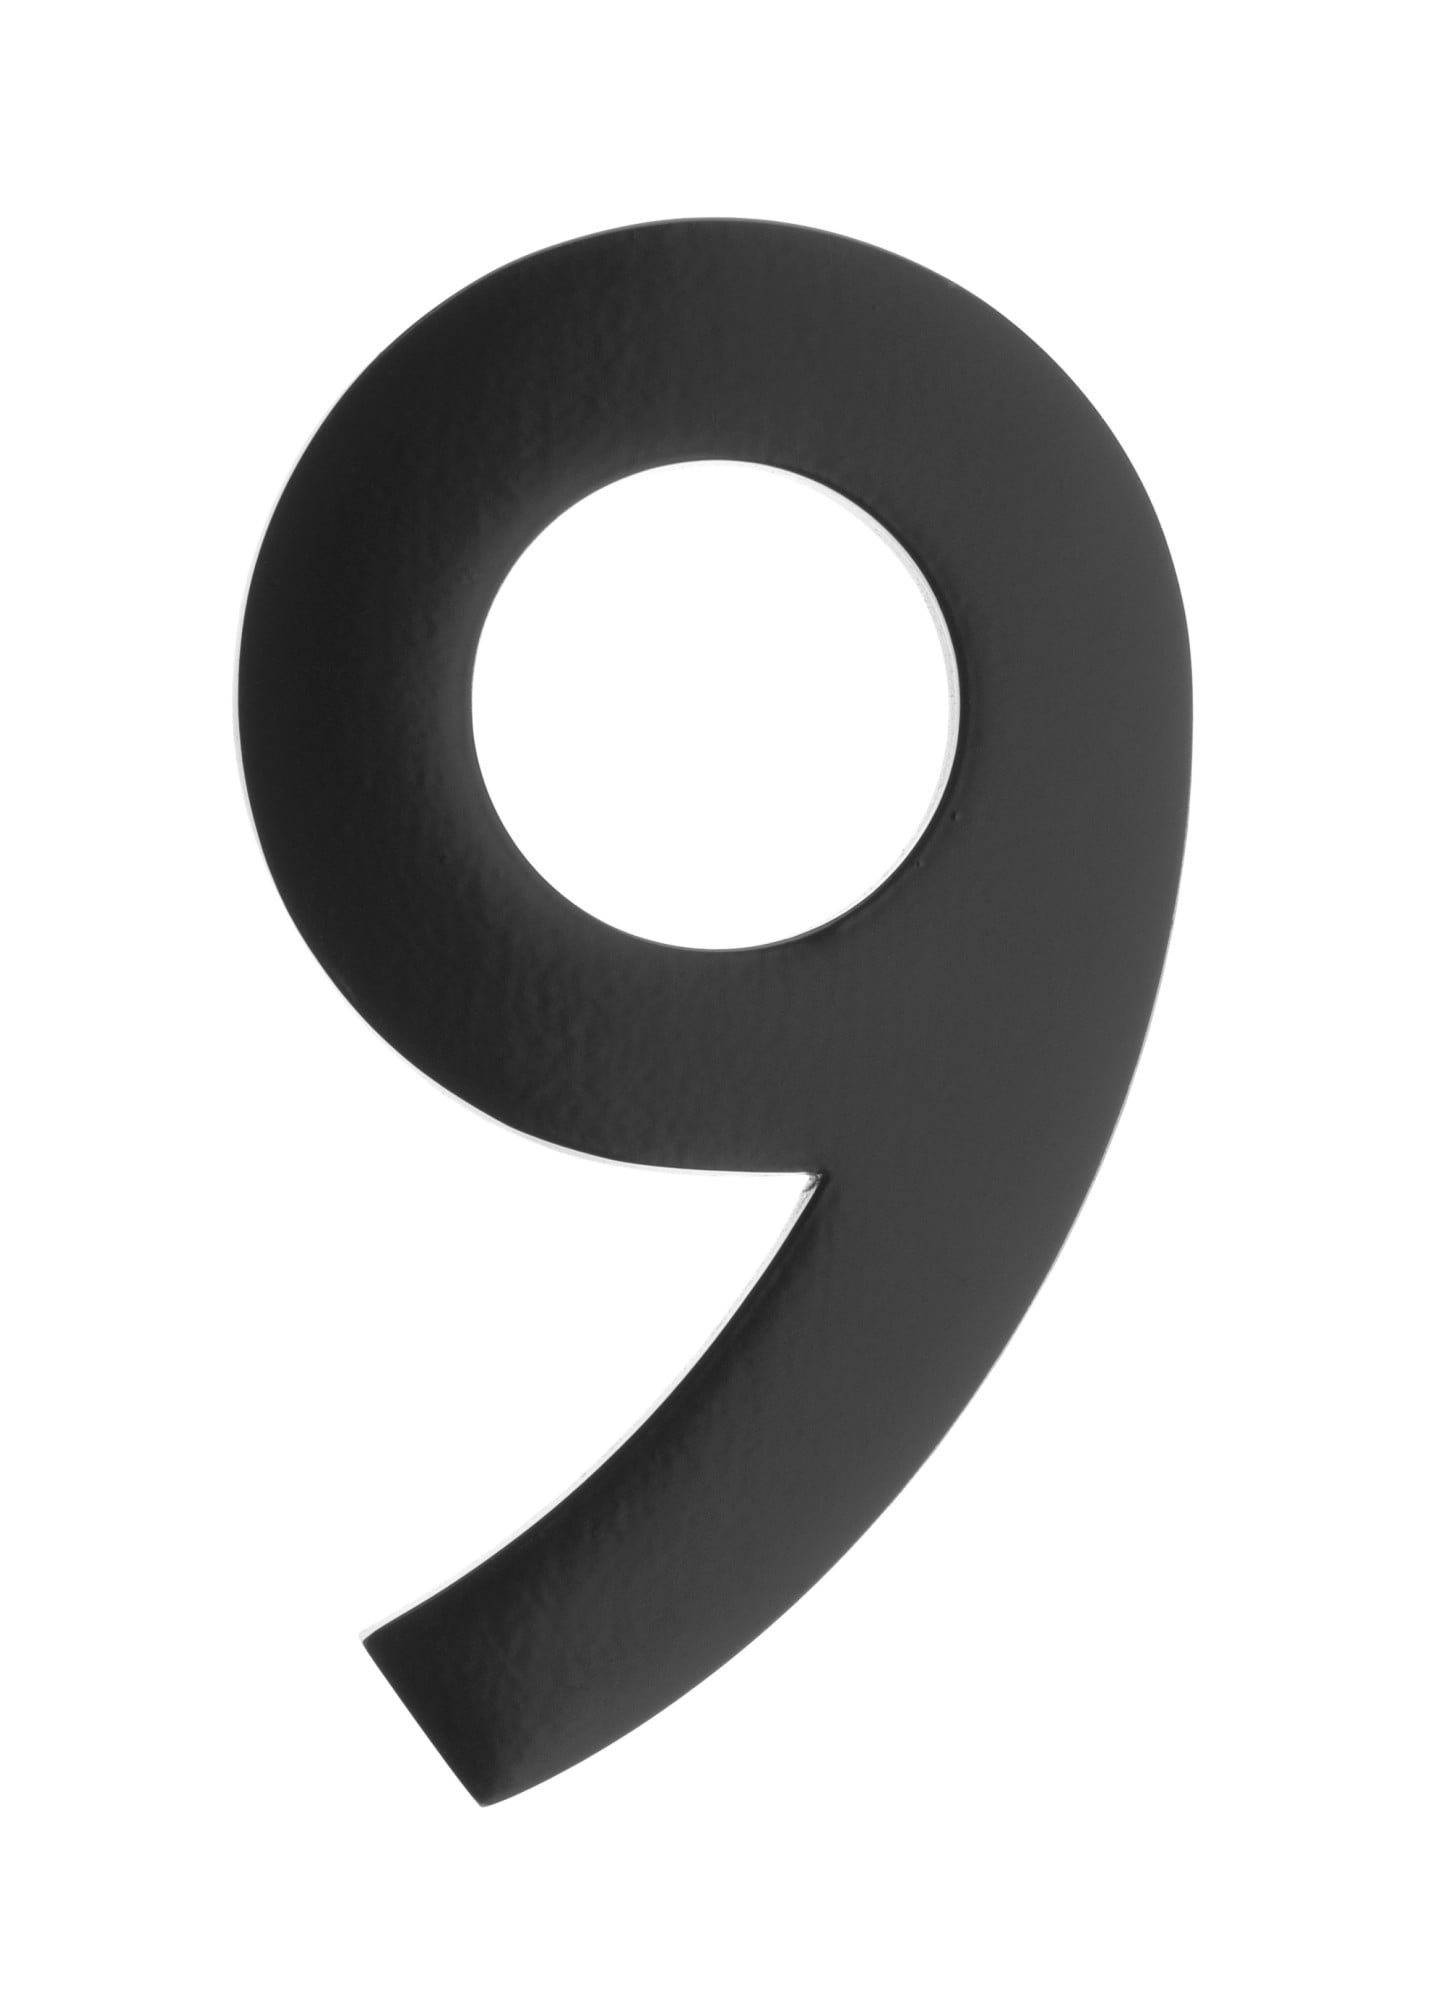 3582b-9 Floating House Number 9, Black - 4 In.